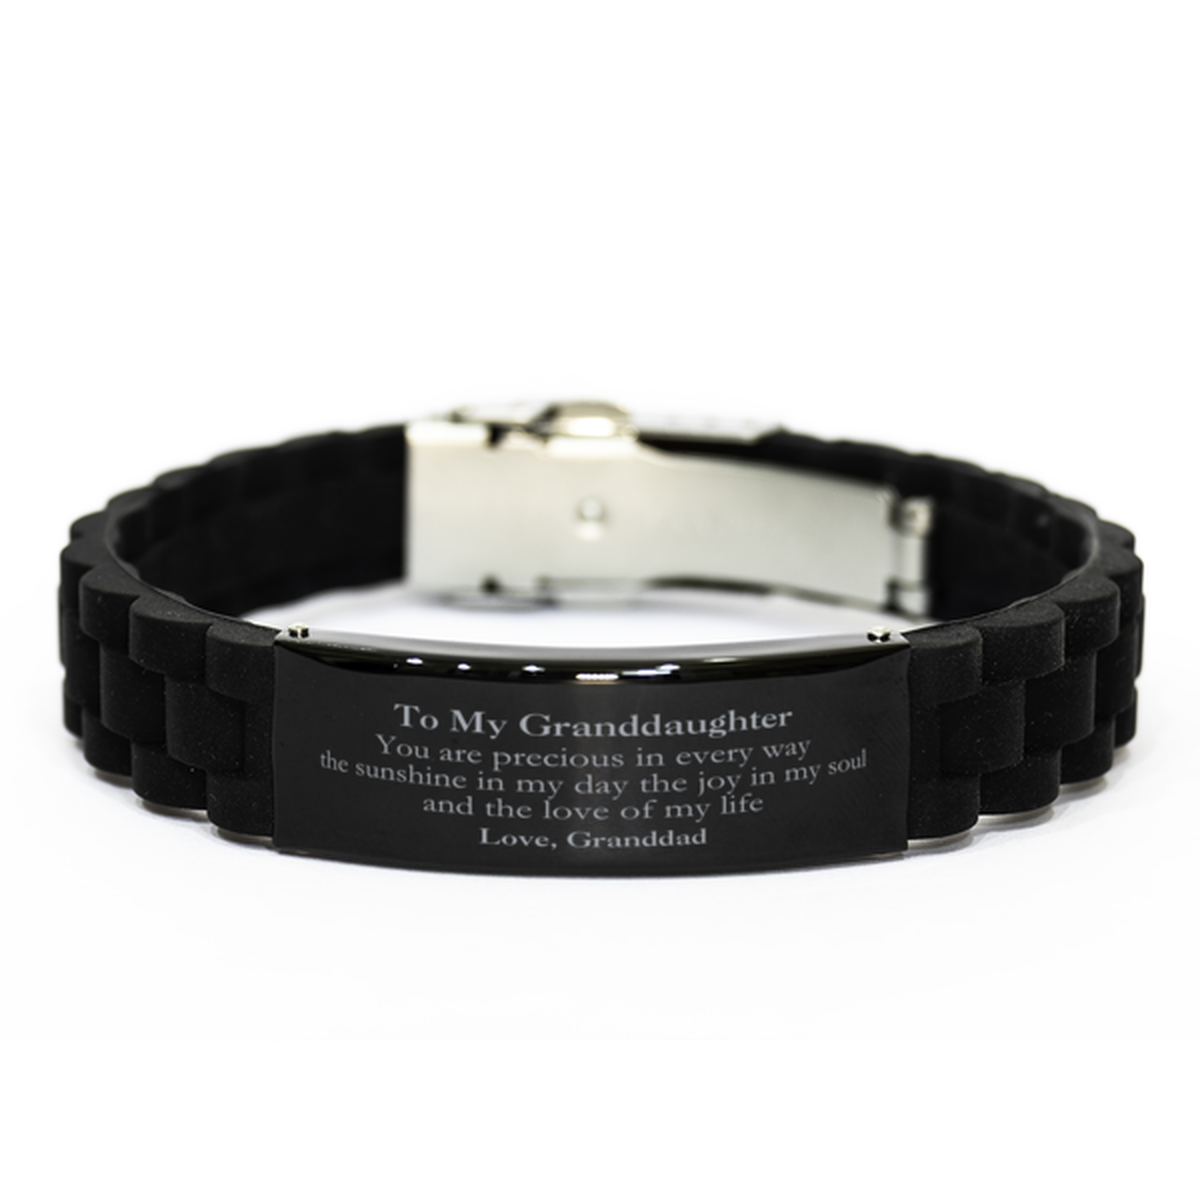 Graduation Gifts for Granddaughter Black Glidelock Clasp Bracelet Present from Granddad, Christmas Granddaughter Birthday Gifts Granddaughter You are precious in every way the sunshine in my day. Love, Granddad